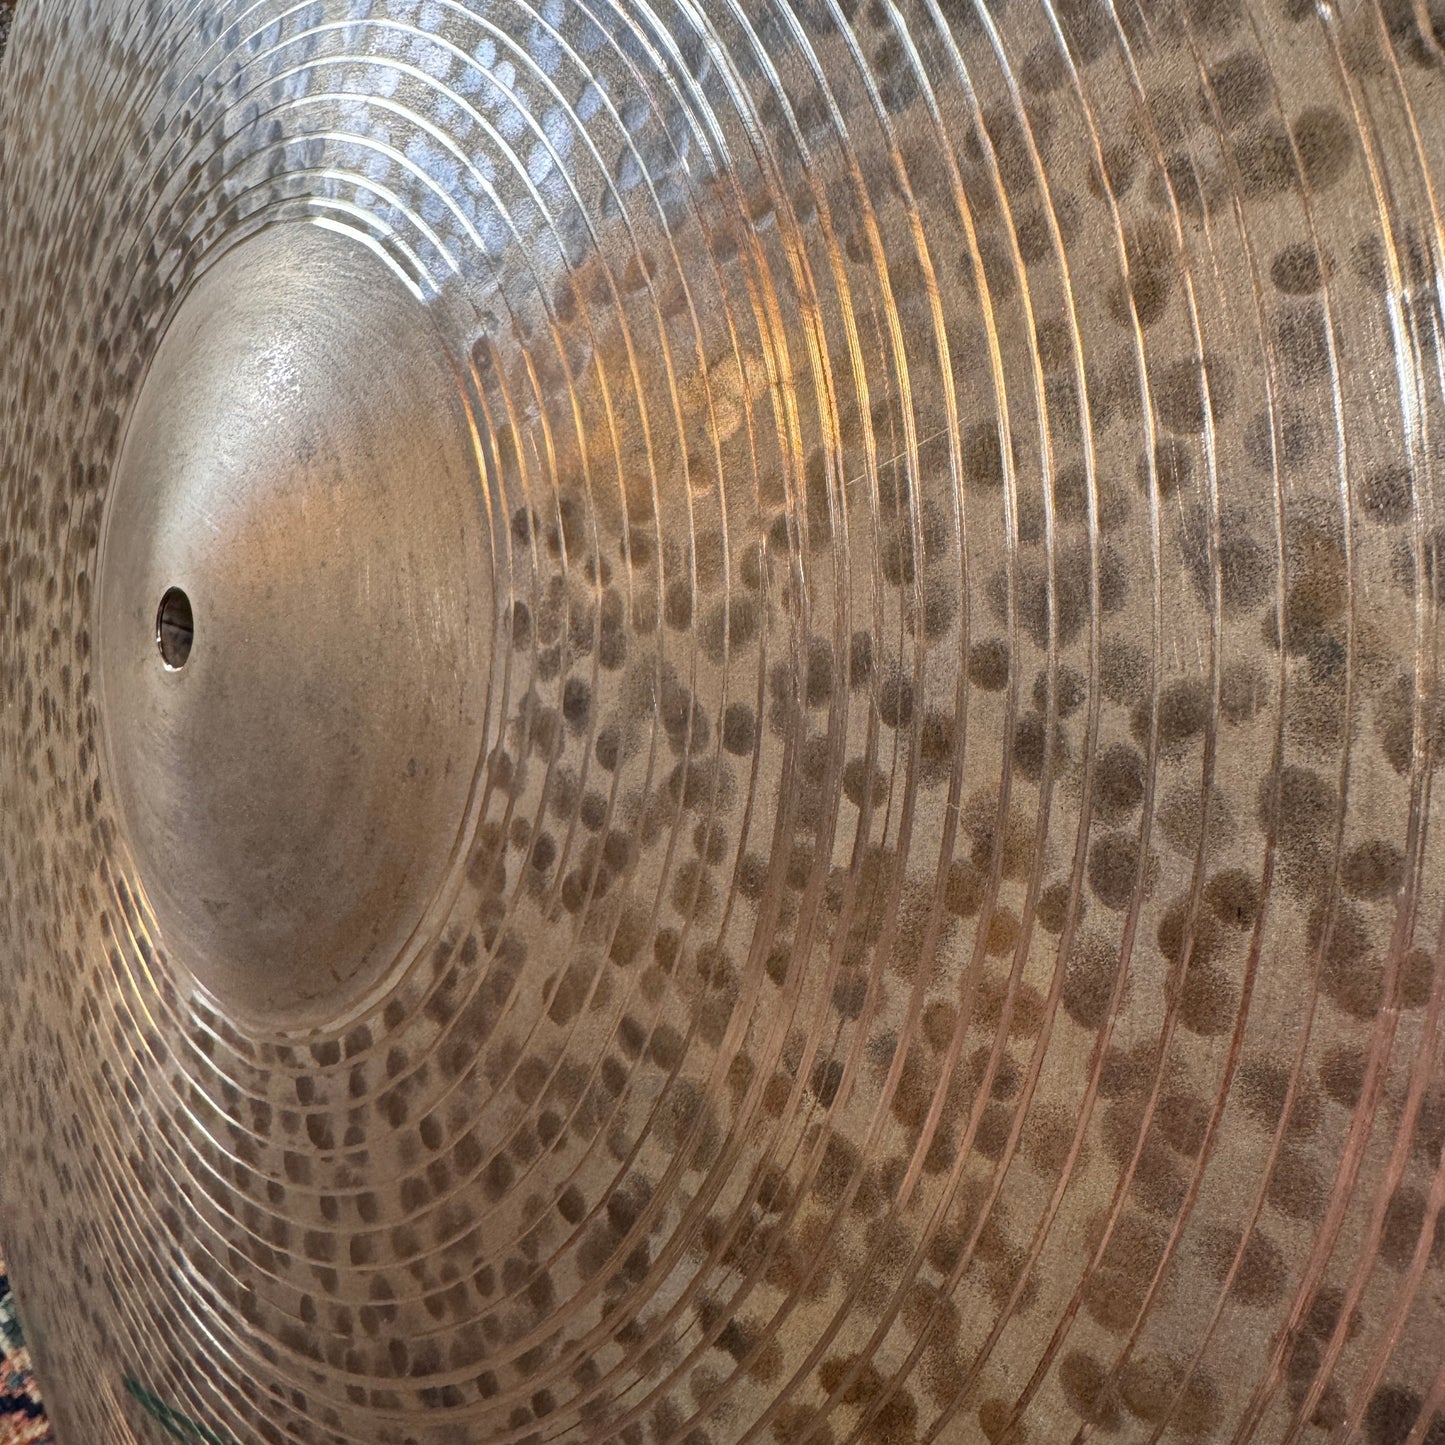 20" Istanbul Agop Signature Ride Cymbal 1736g *Video Demo*